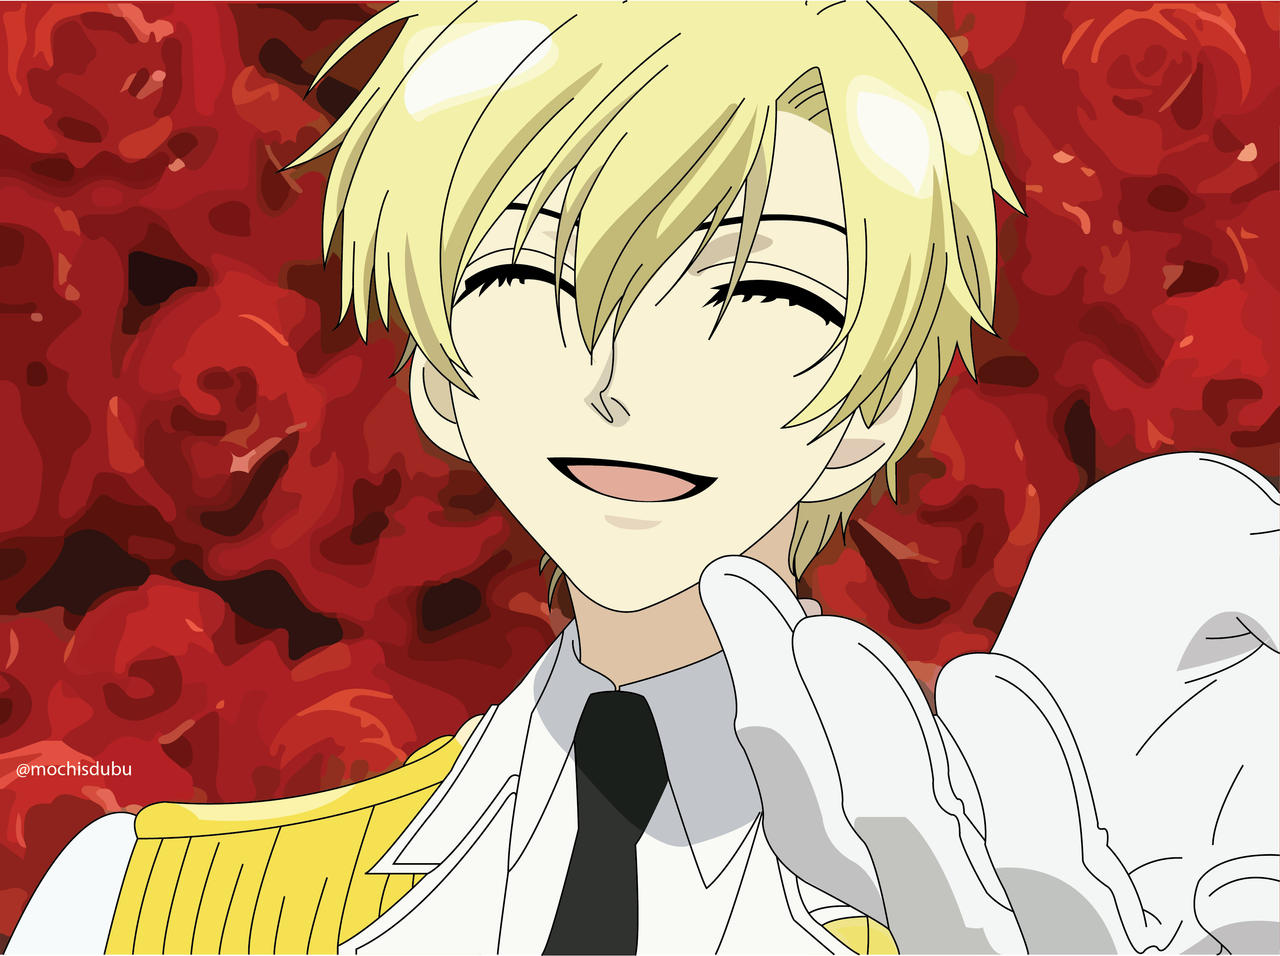 3. "Tamaki Suoh" from Ouran High School Host Club - wide 1